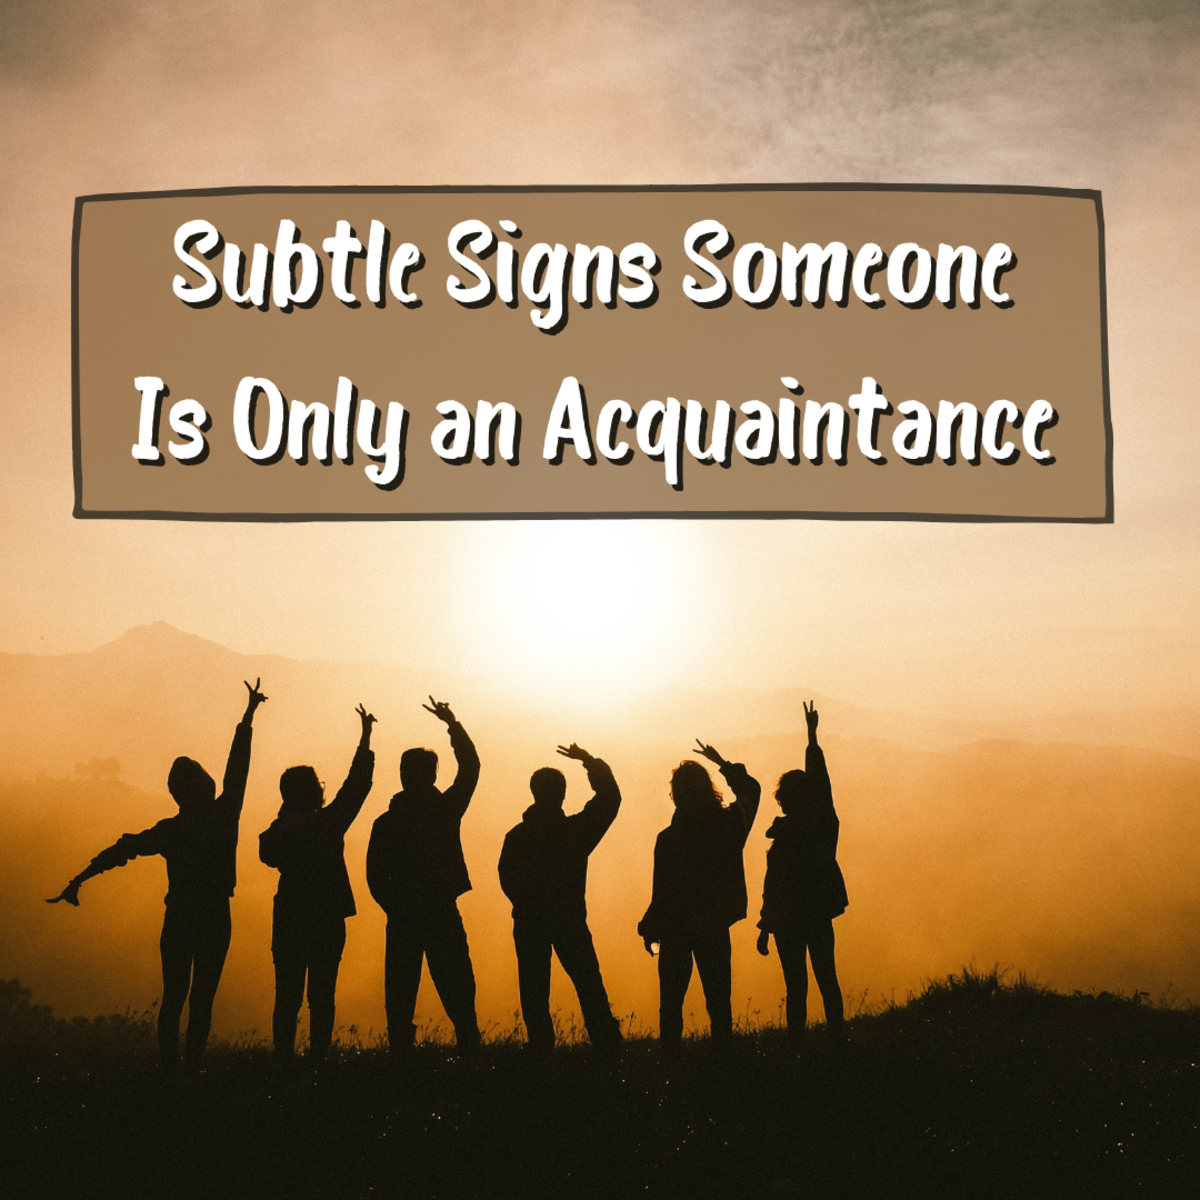 5 Subtle Signs Someone Is an Acquaintance, Not a Friend